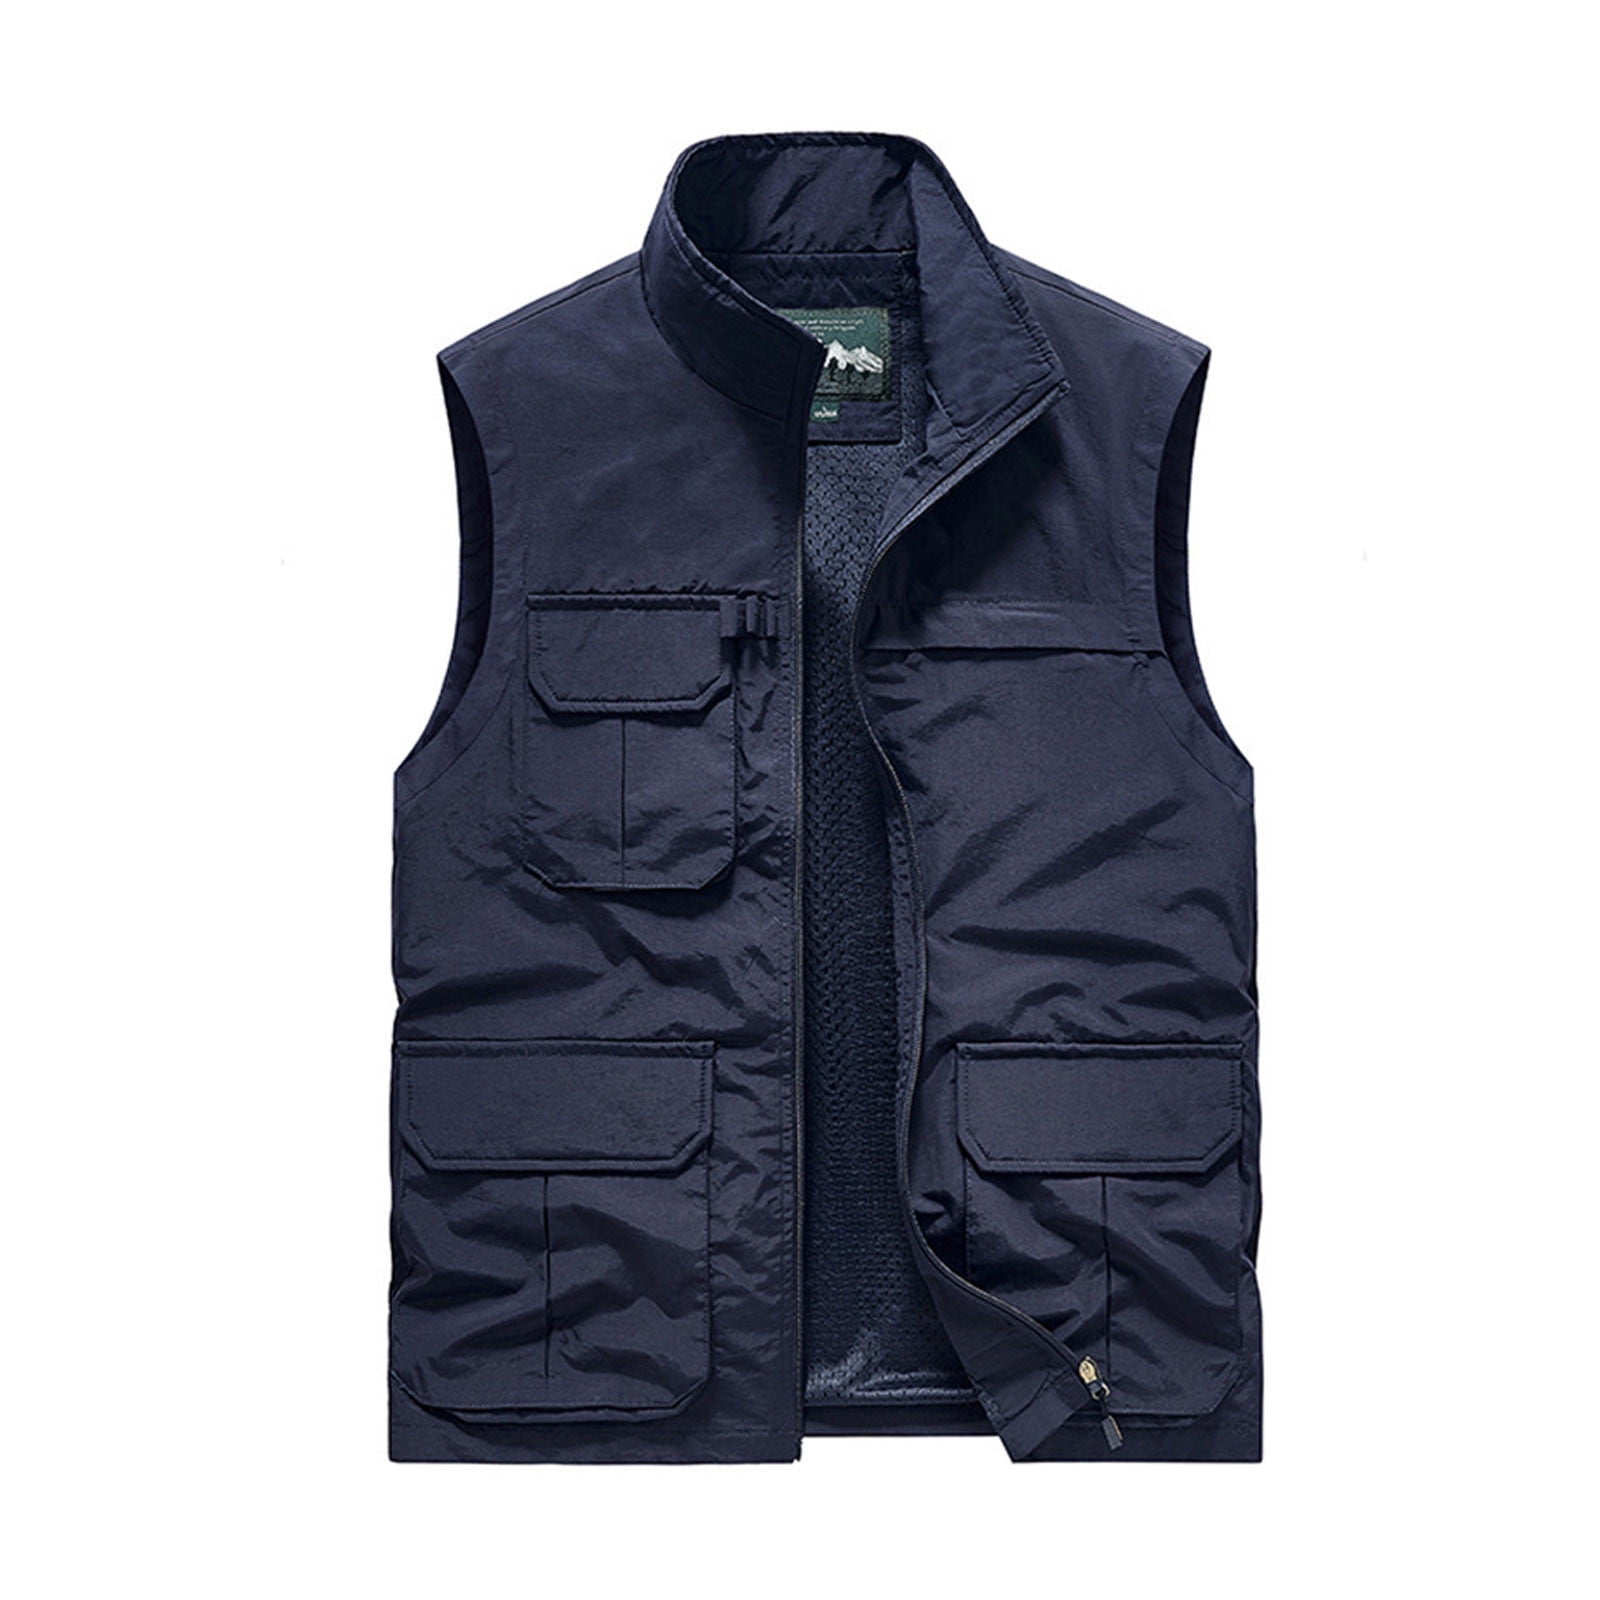 YYDGH Men's Outdoor Fishing Vest Casual Work Cargo Vests Lightweight Waistcoat  Vest with Pockets Fall Photography Tour Coats 